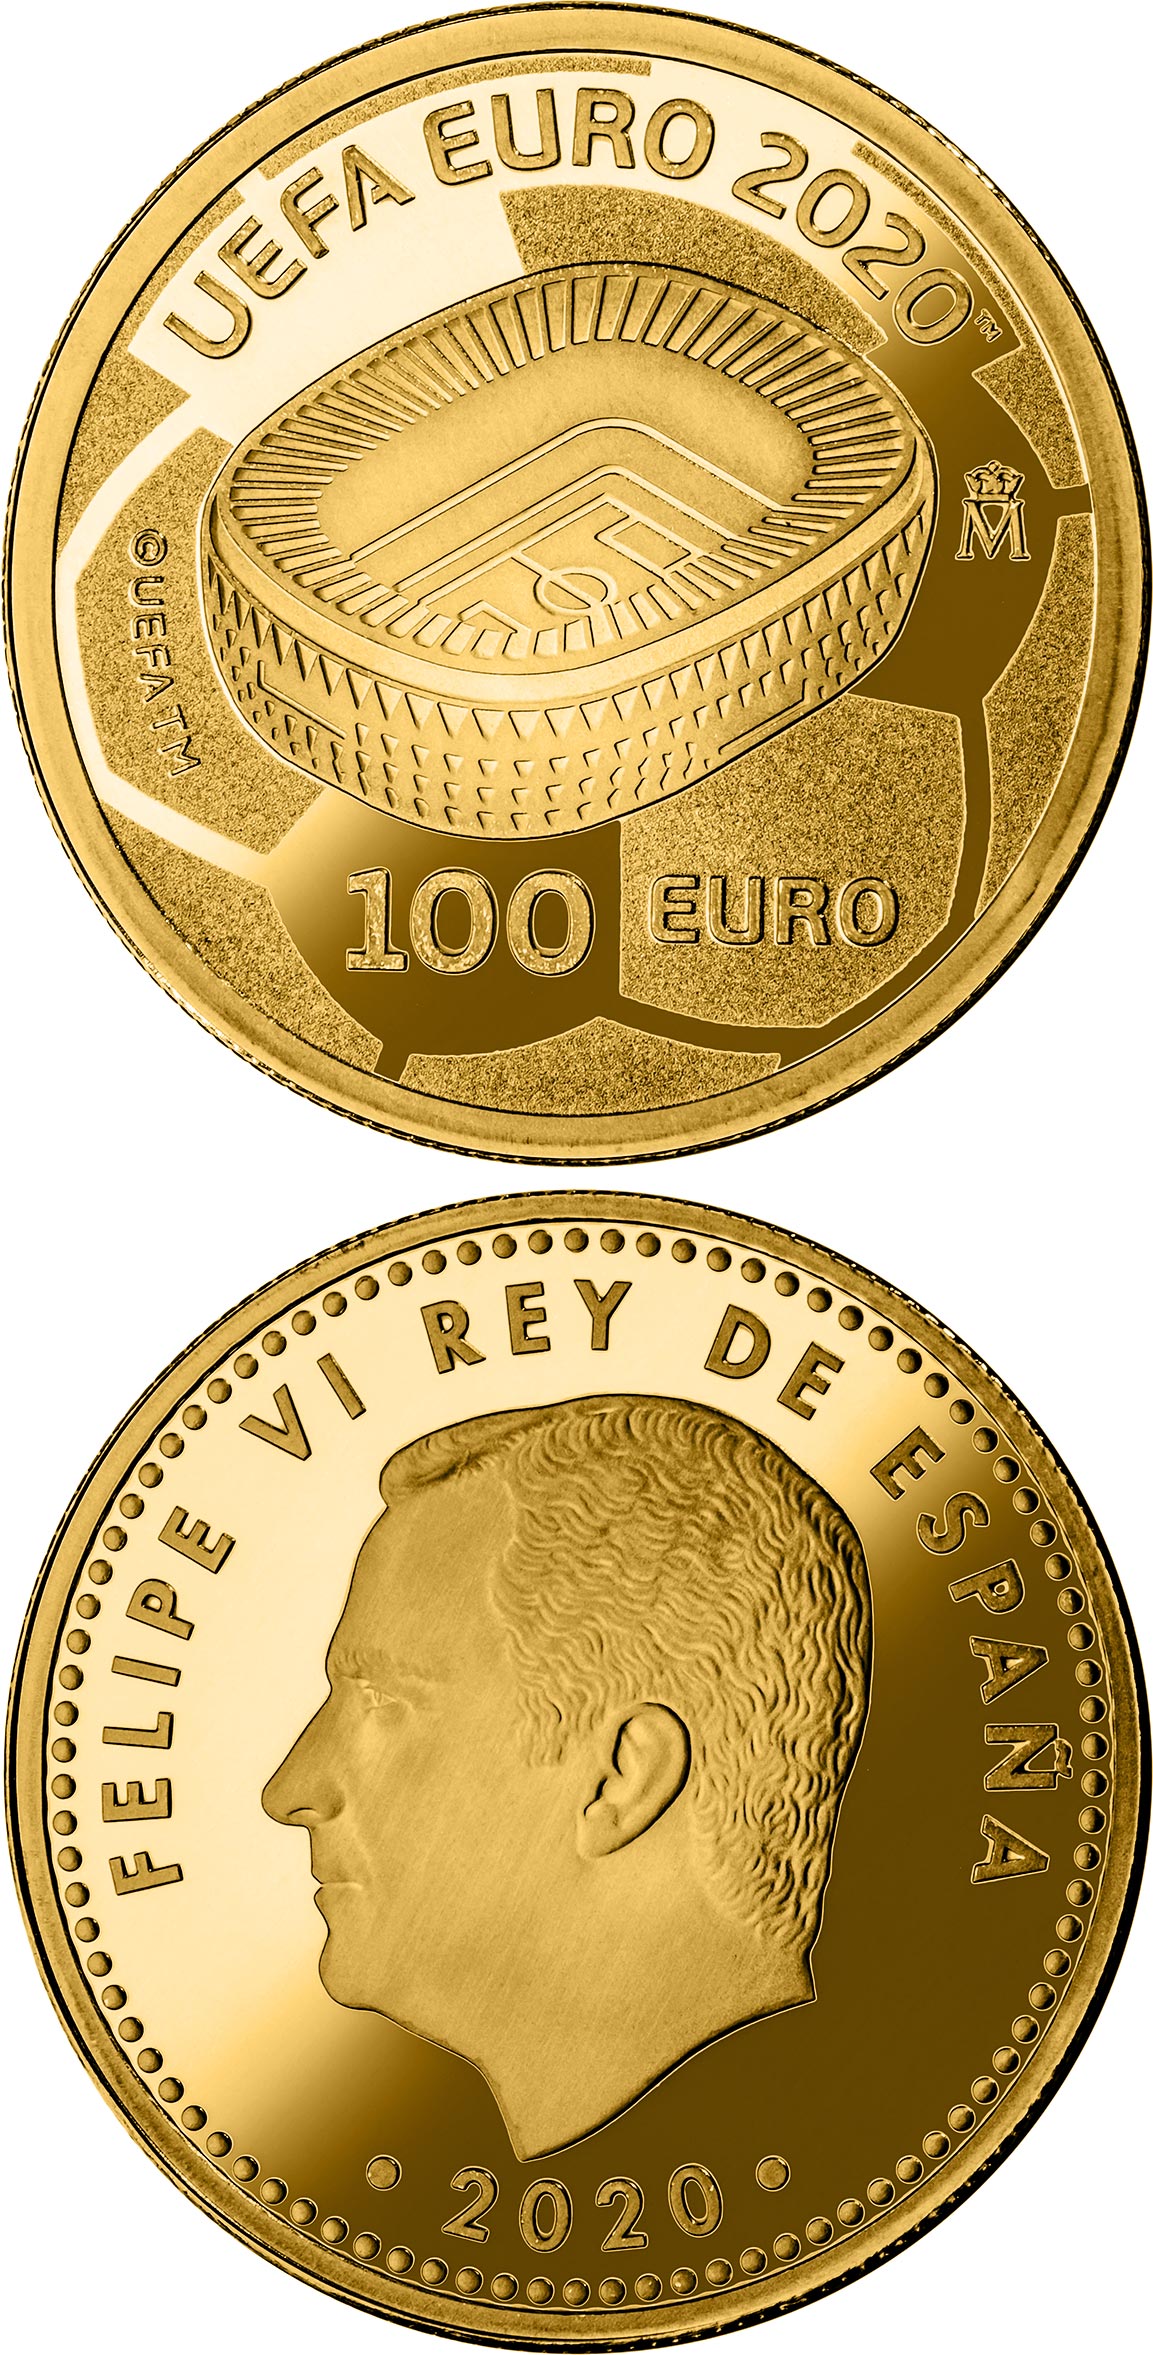 Image of 100 euro coin - UEFA EURO 2020 | Spain 2020.  The Gold coin is of Proof quality.